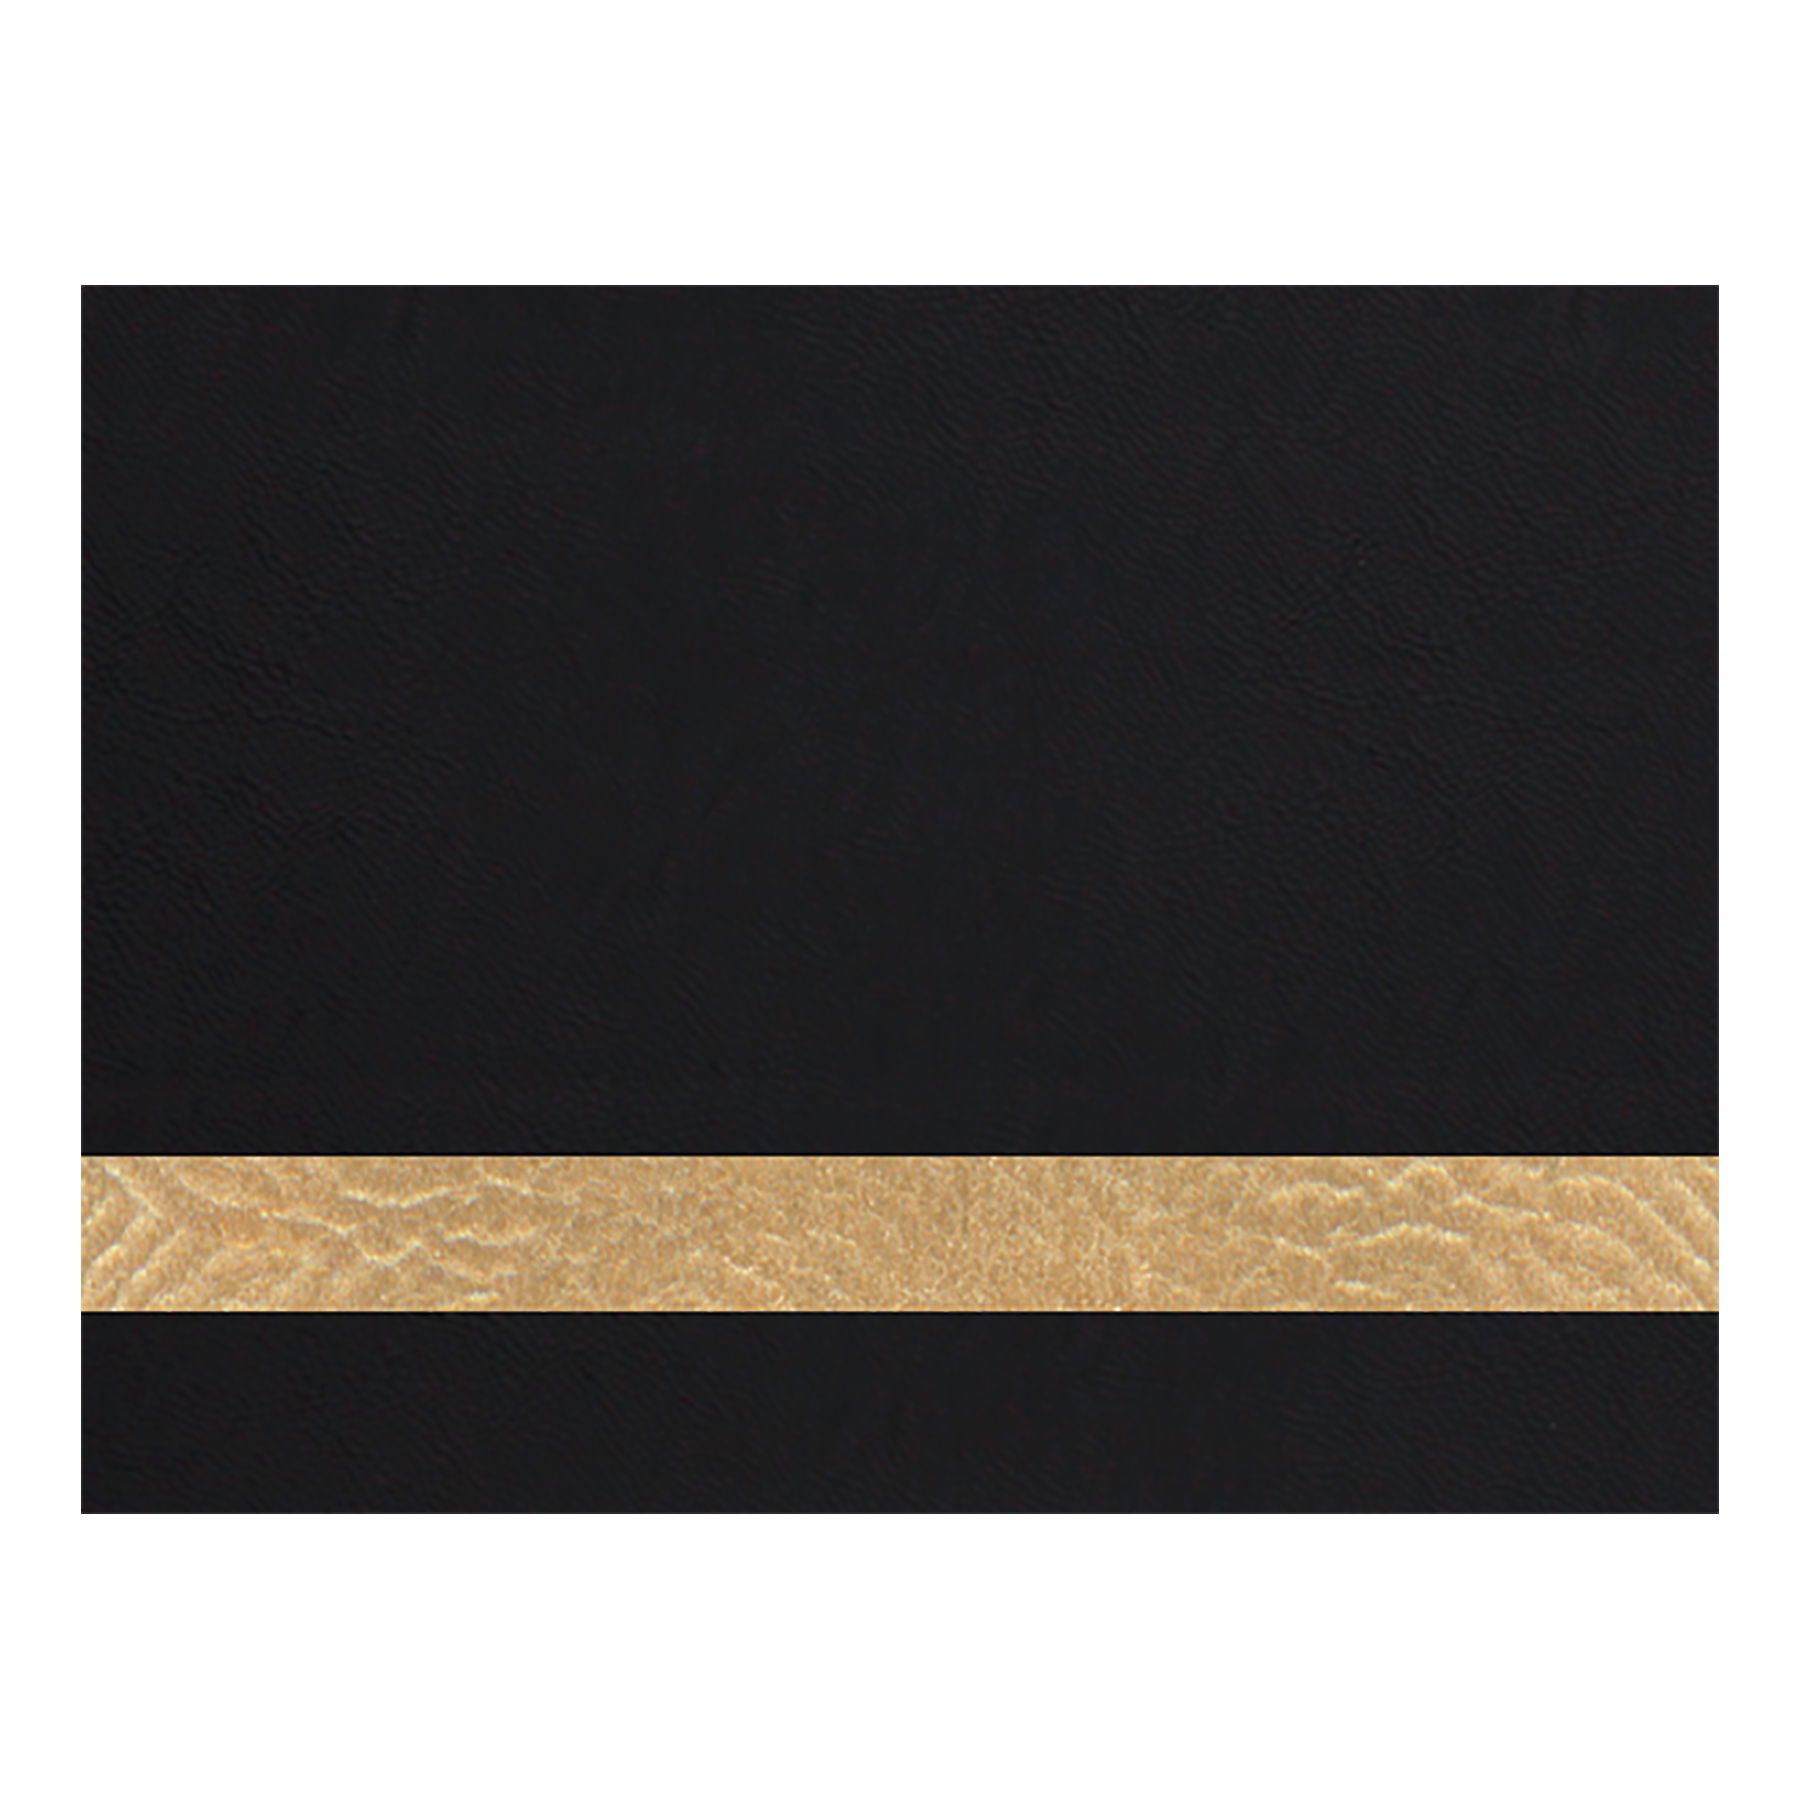 PRE-ORDER! Full Size Laserable Leatherette Sheet Stock, Rayjet Laser Engravers (Available Jan. 2022) Engraving Supplies Craftworks NW R400 (40" x 24") Black/Gold 